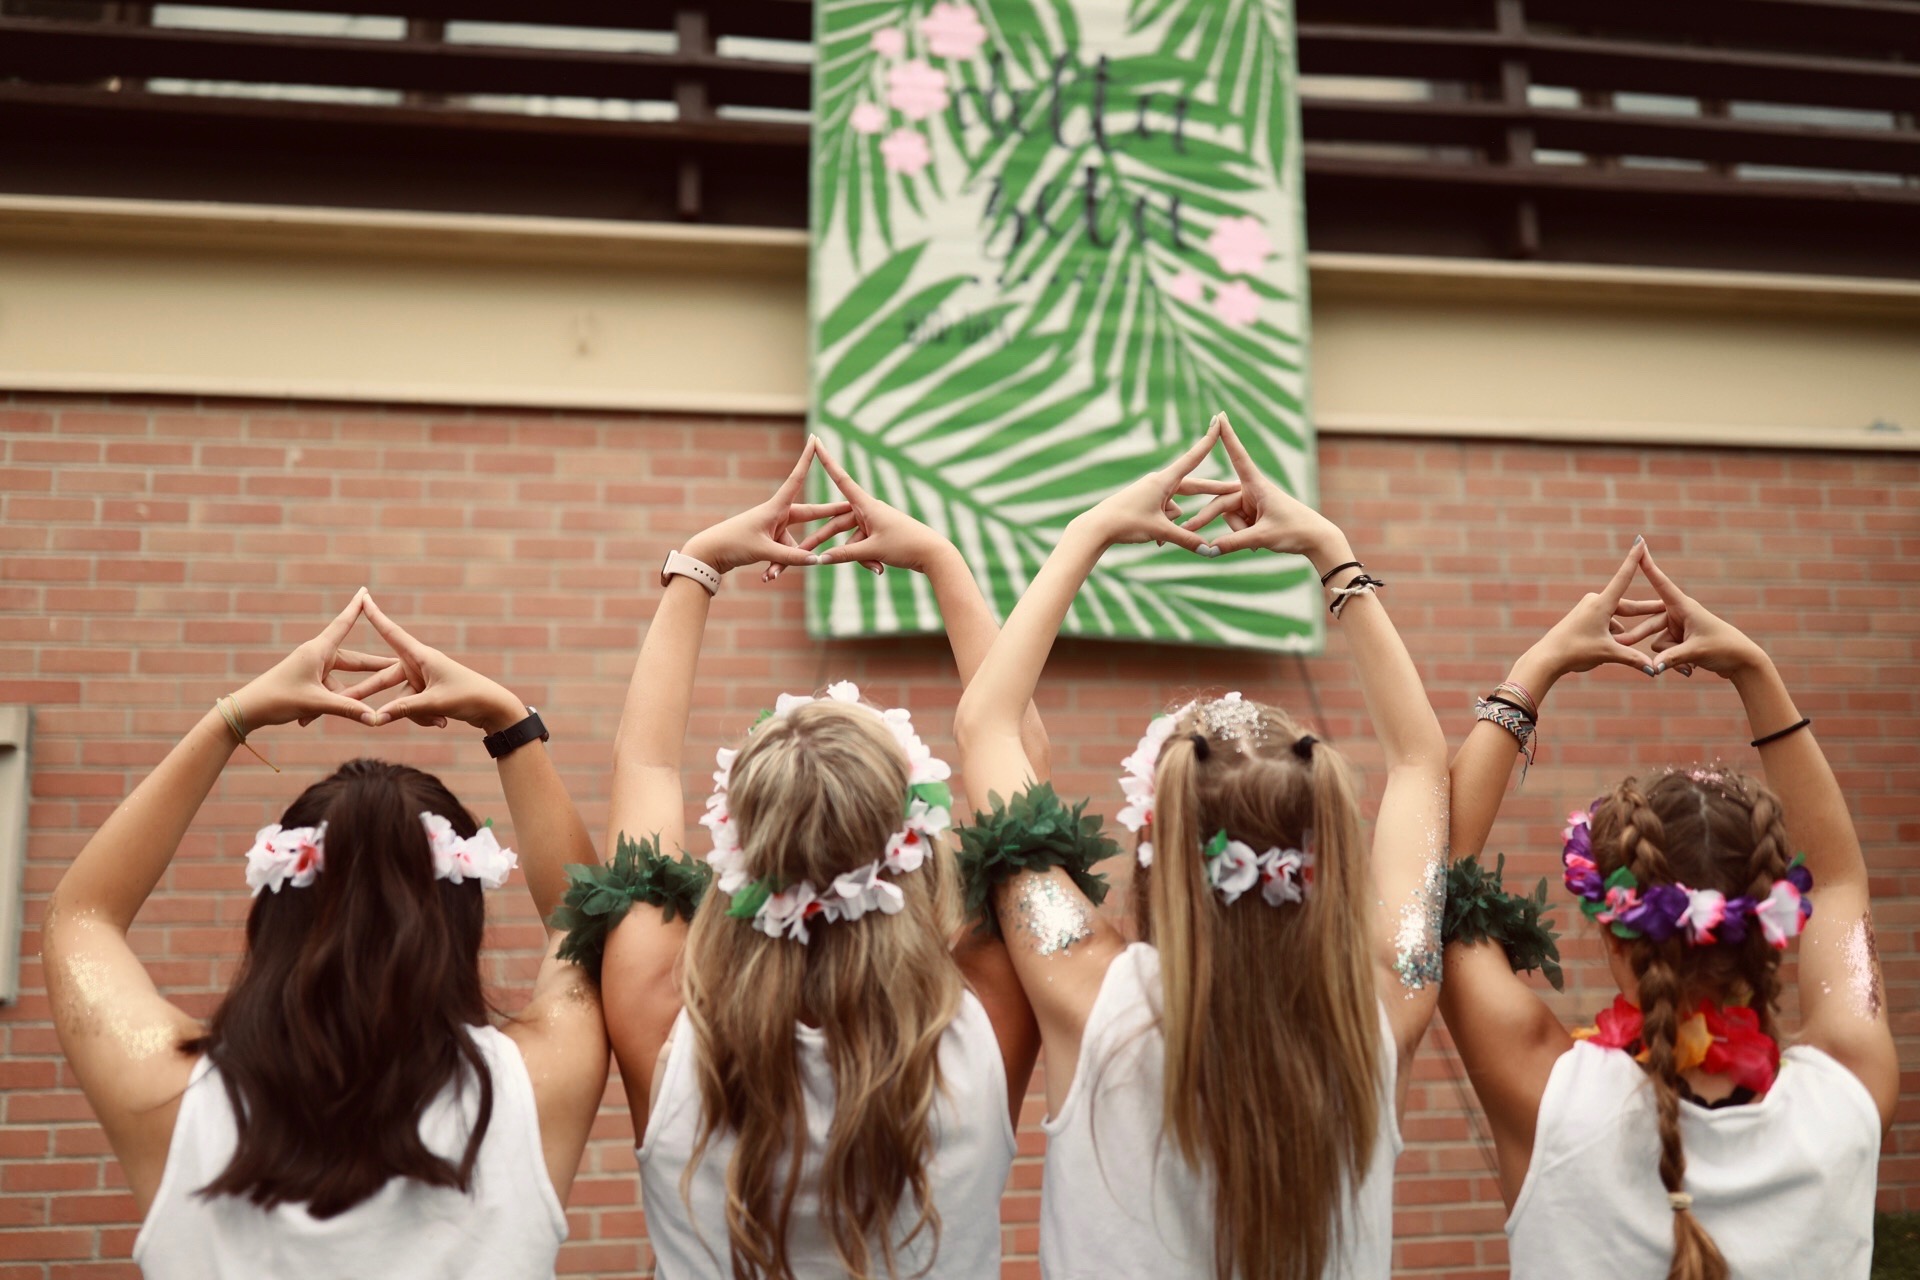 four women with backs to camera doing the delta zeta sign with their hands